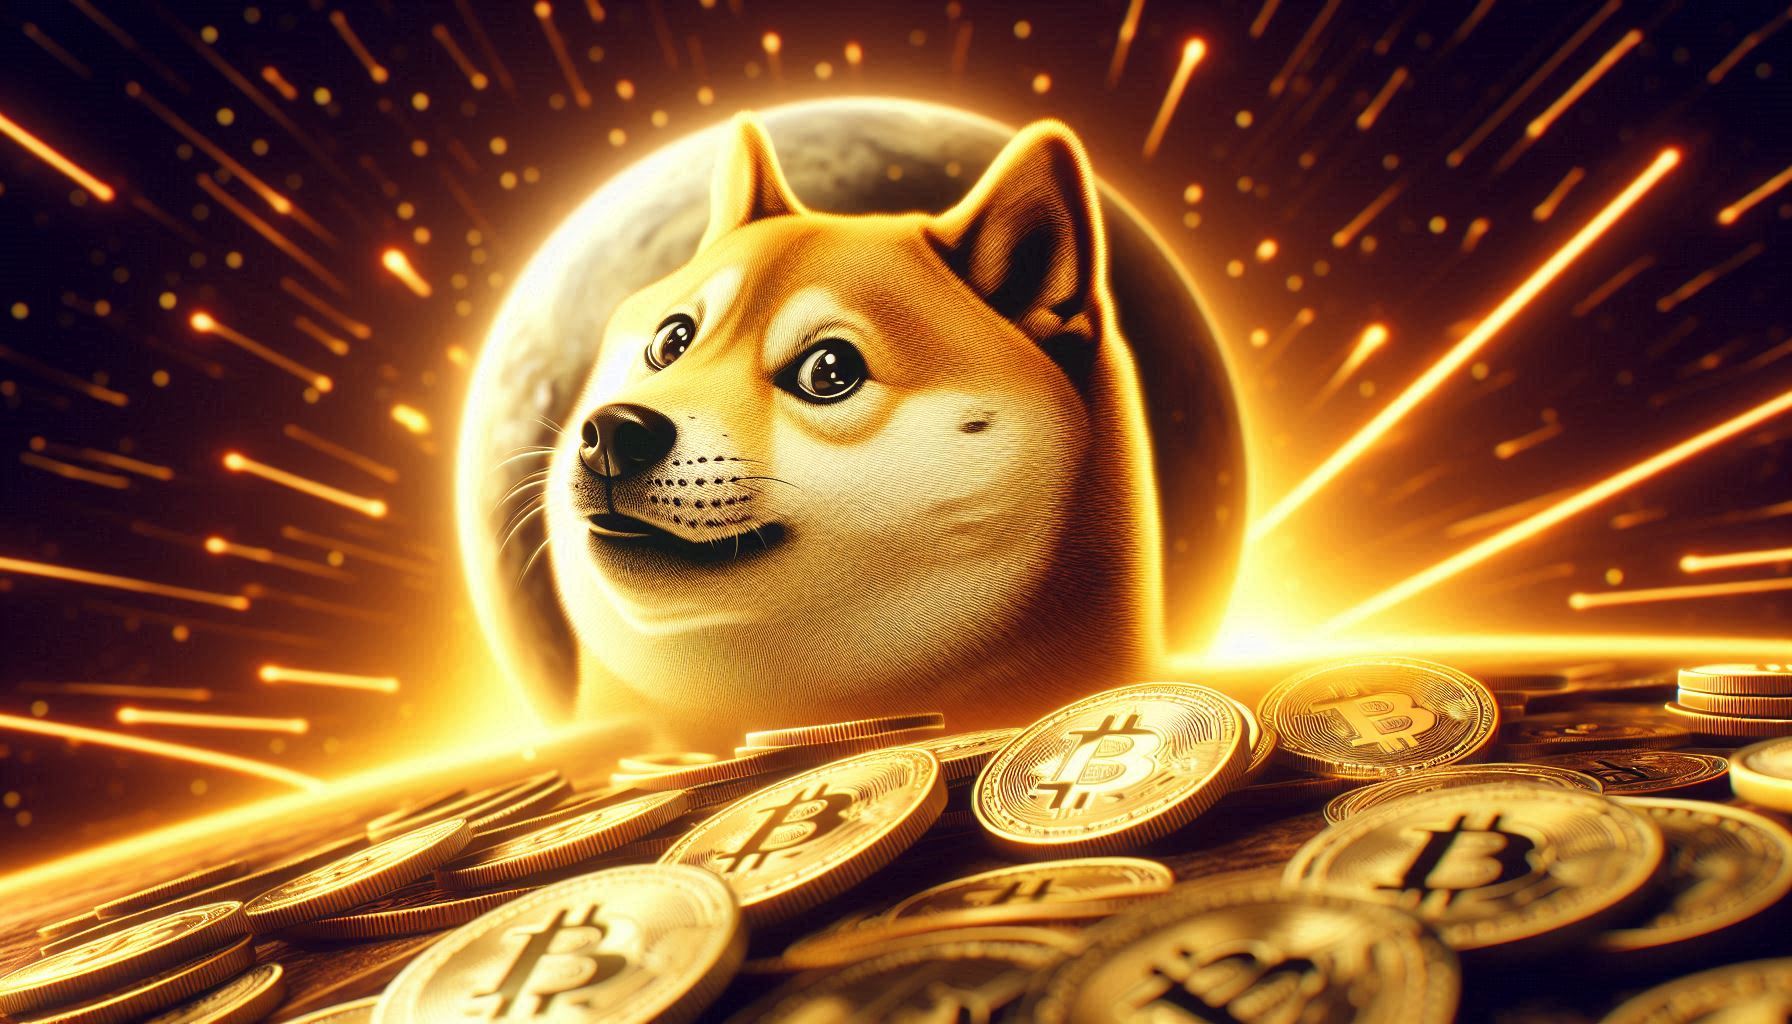 Dogecoin (DOGE) Price Surges 6%, Presents Potential Buying Opportunity